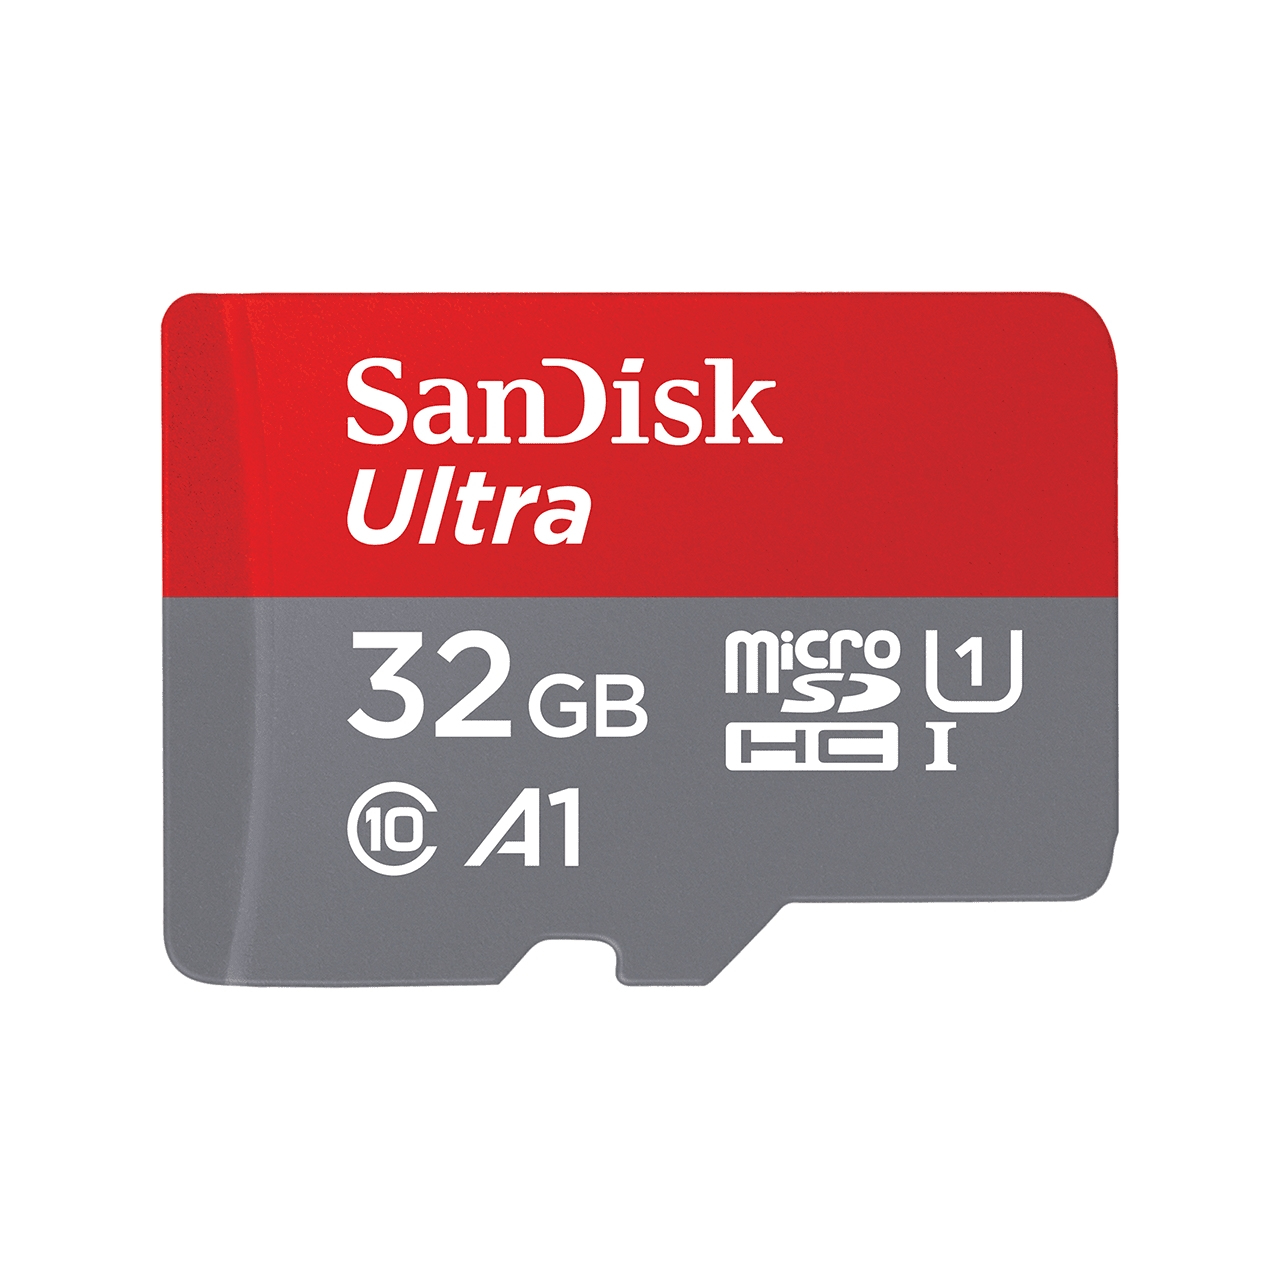 Sandisk microsdhc ultra android 32 gb